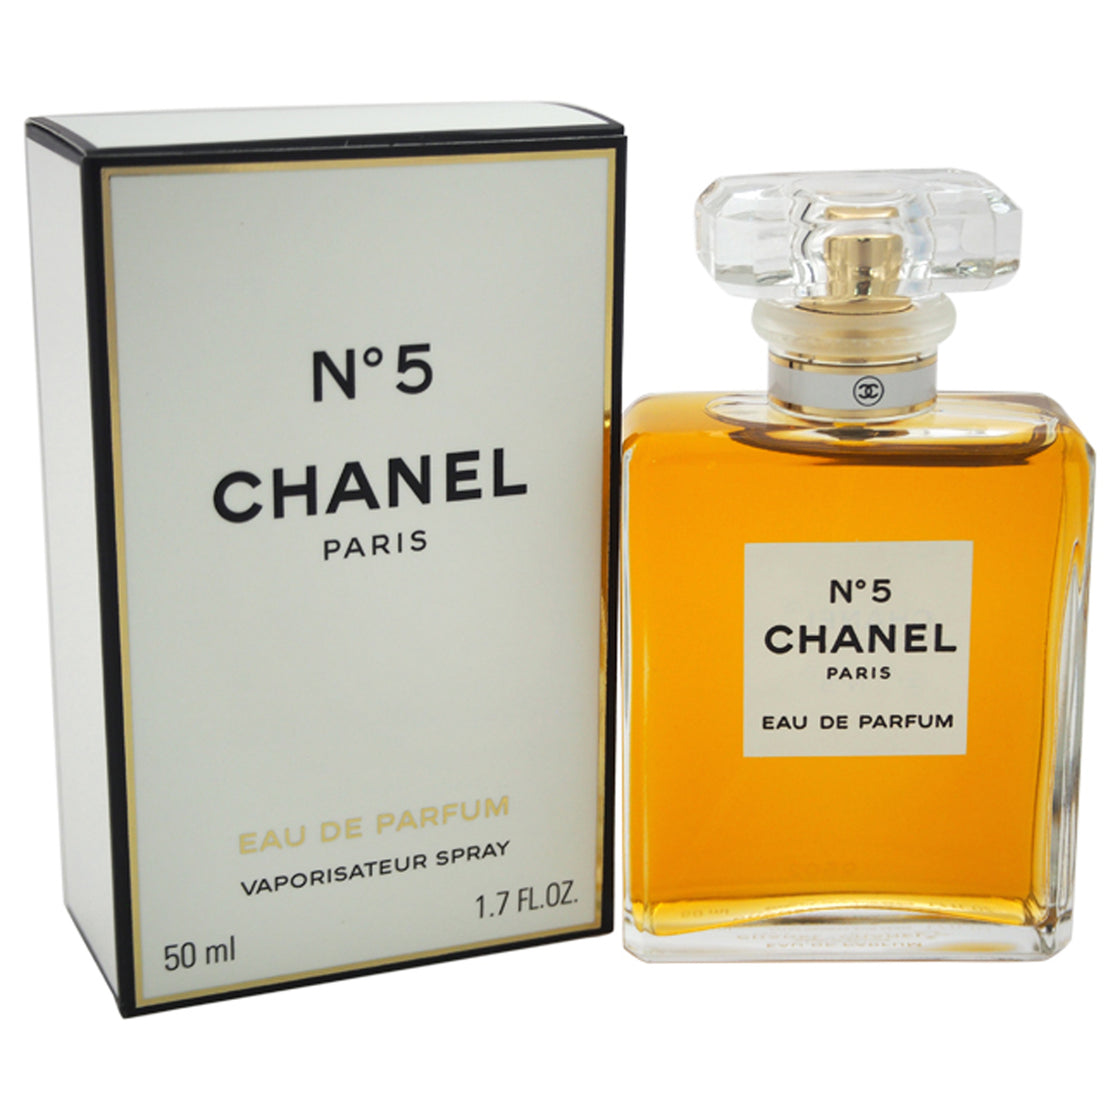 Chanel No.5 by Chanel for Women - 1.7 oz EDP Spray